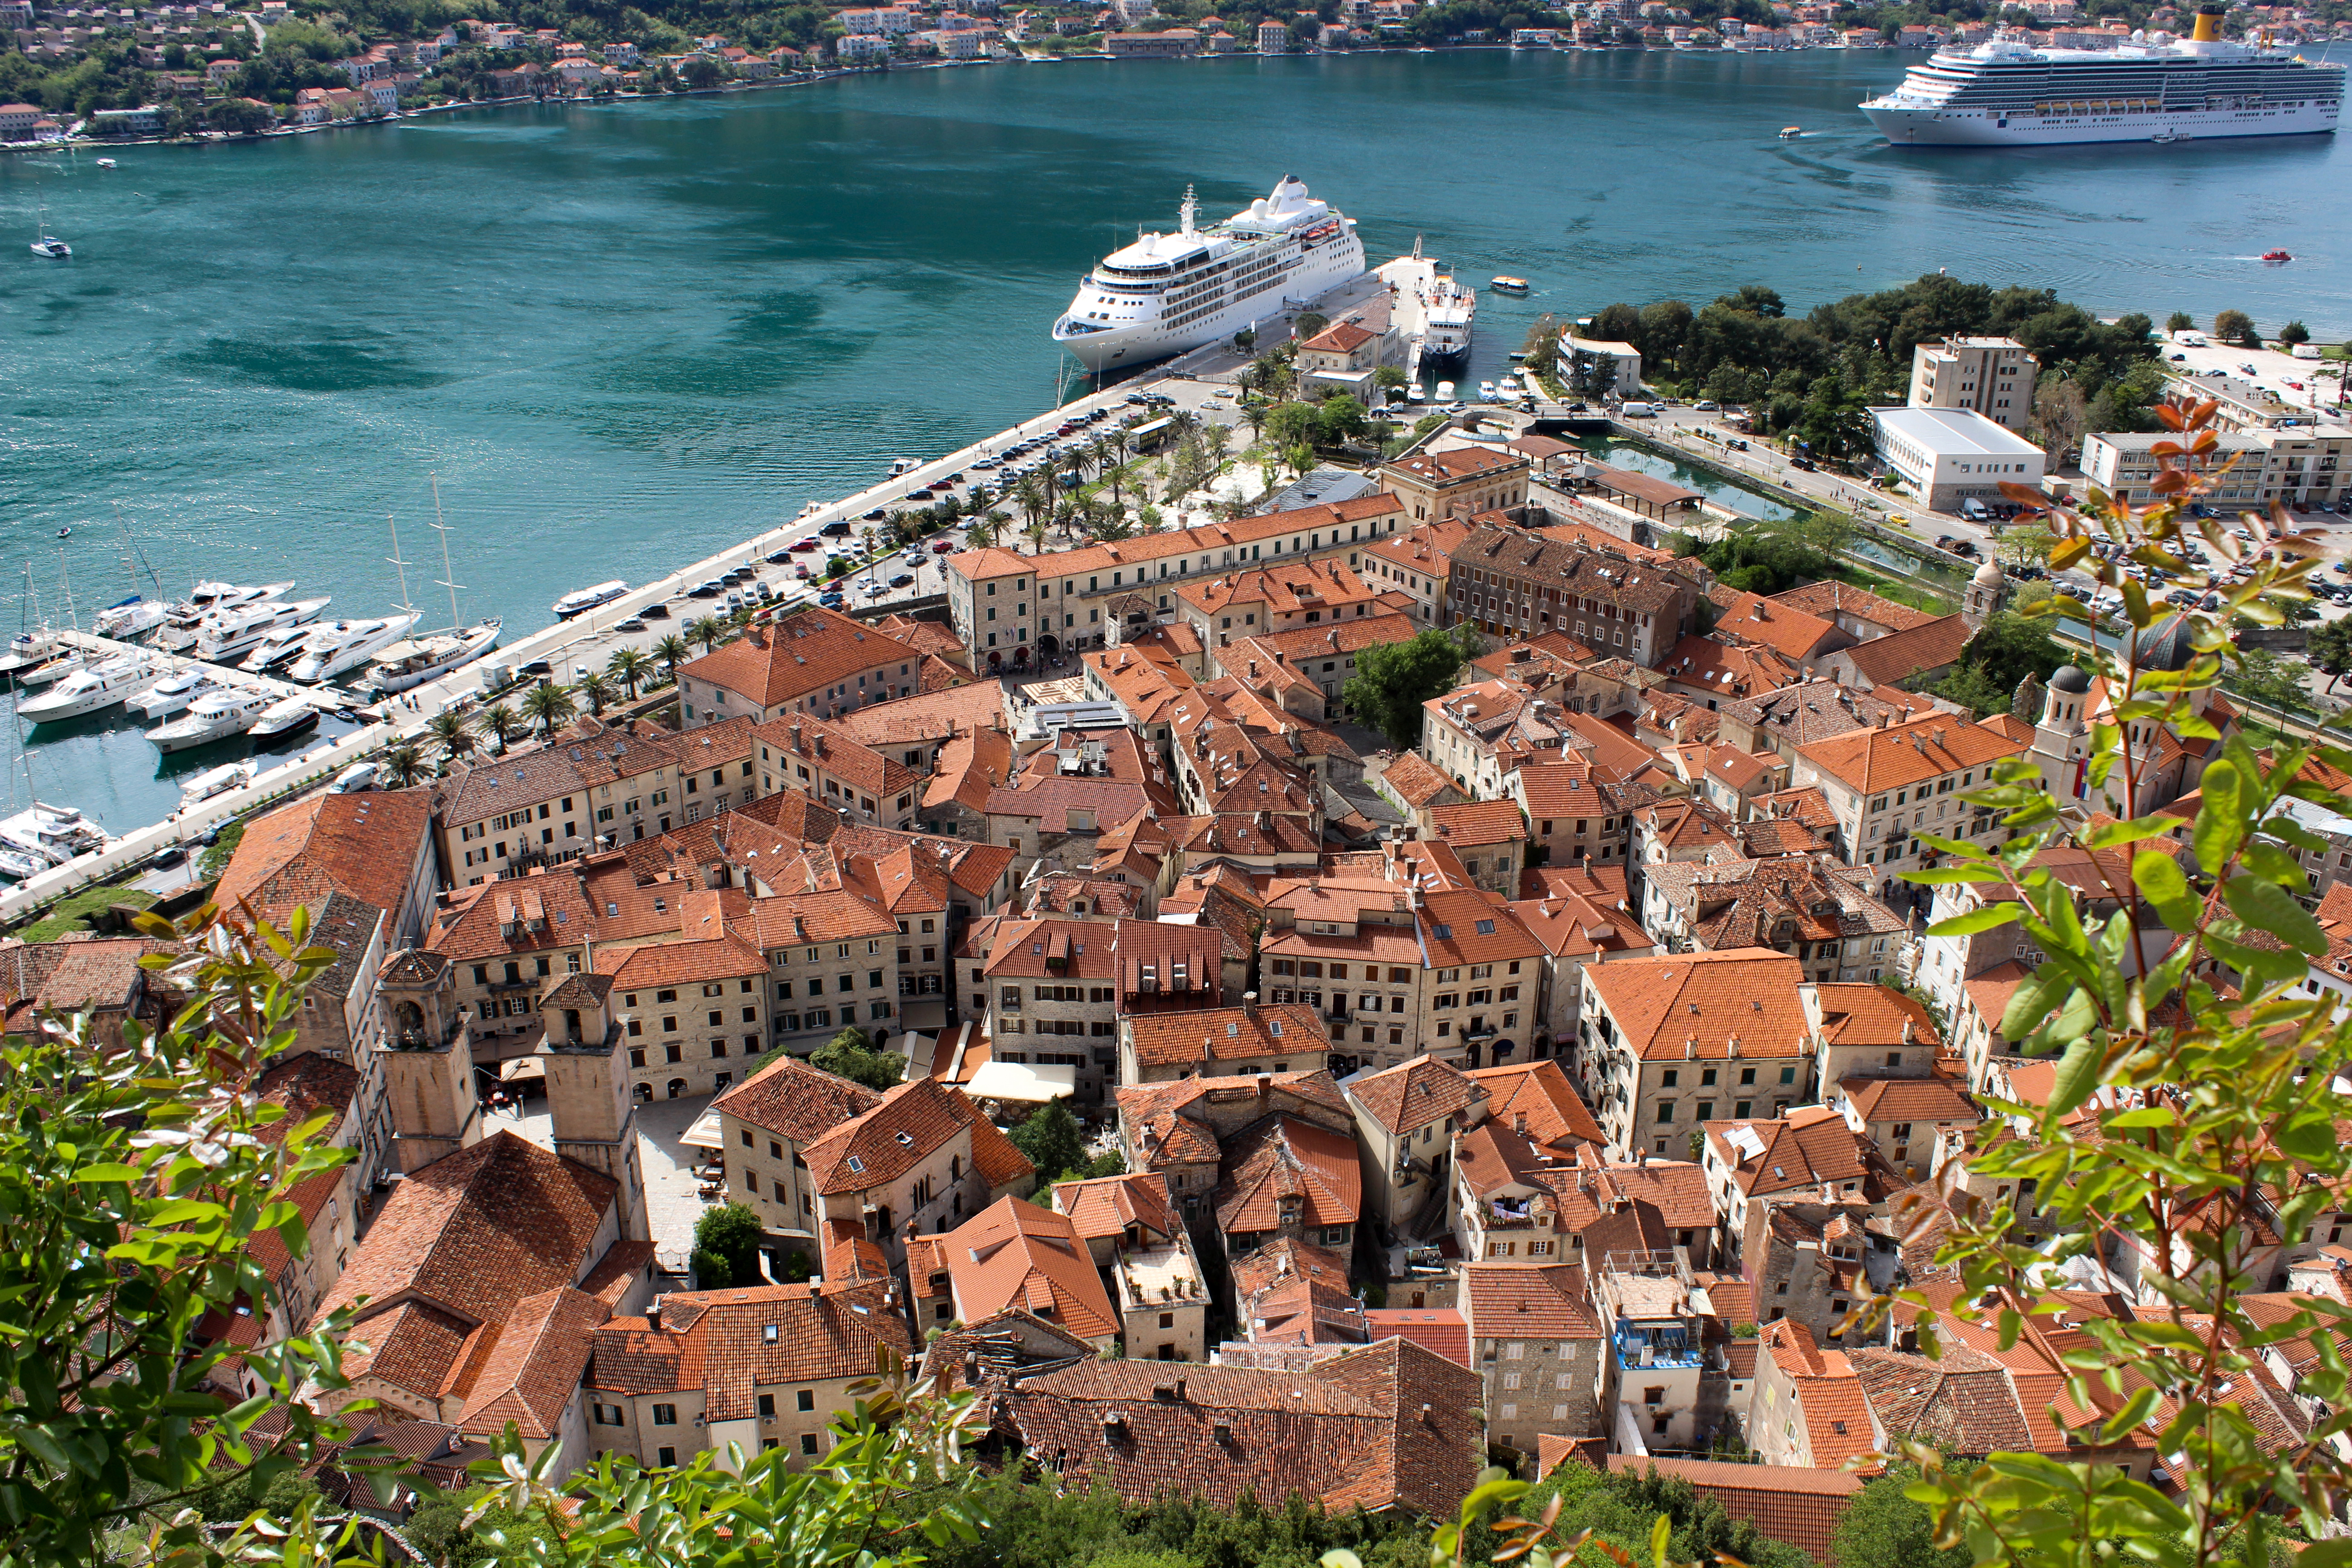 Buildings of the city in which Russians, Ukrainians, Belarusians can actually obtain citizenship of Montenegro